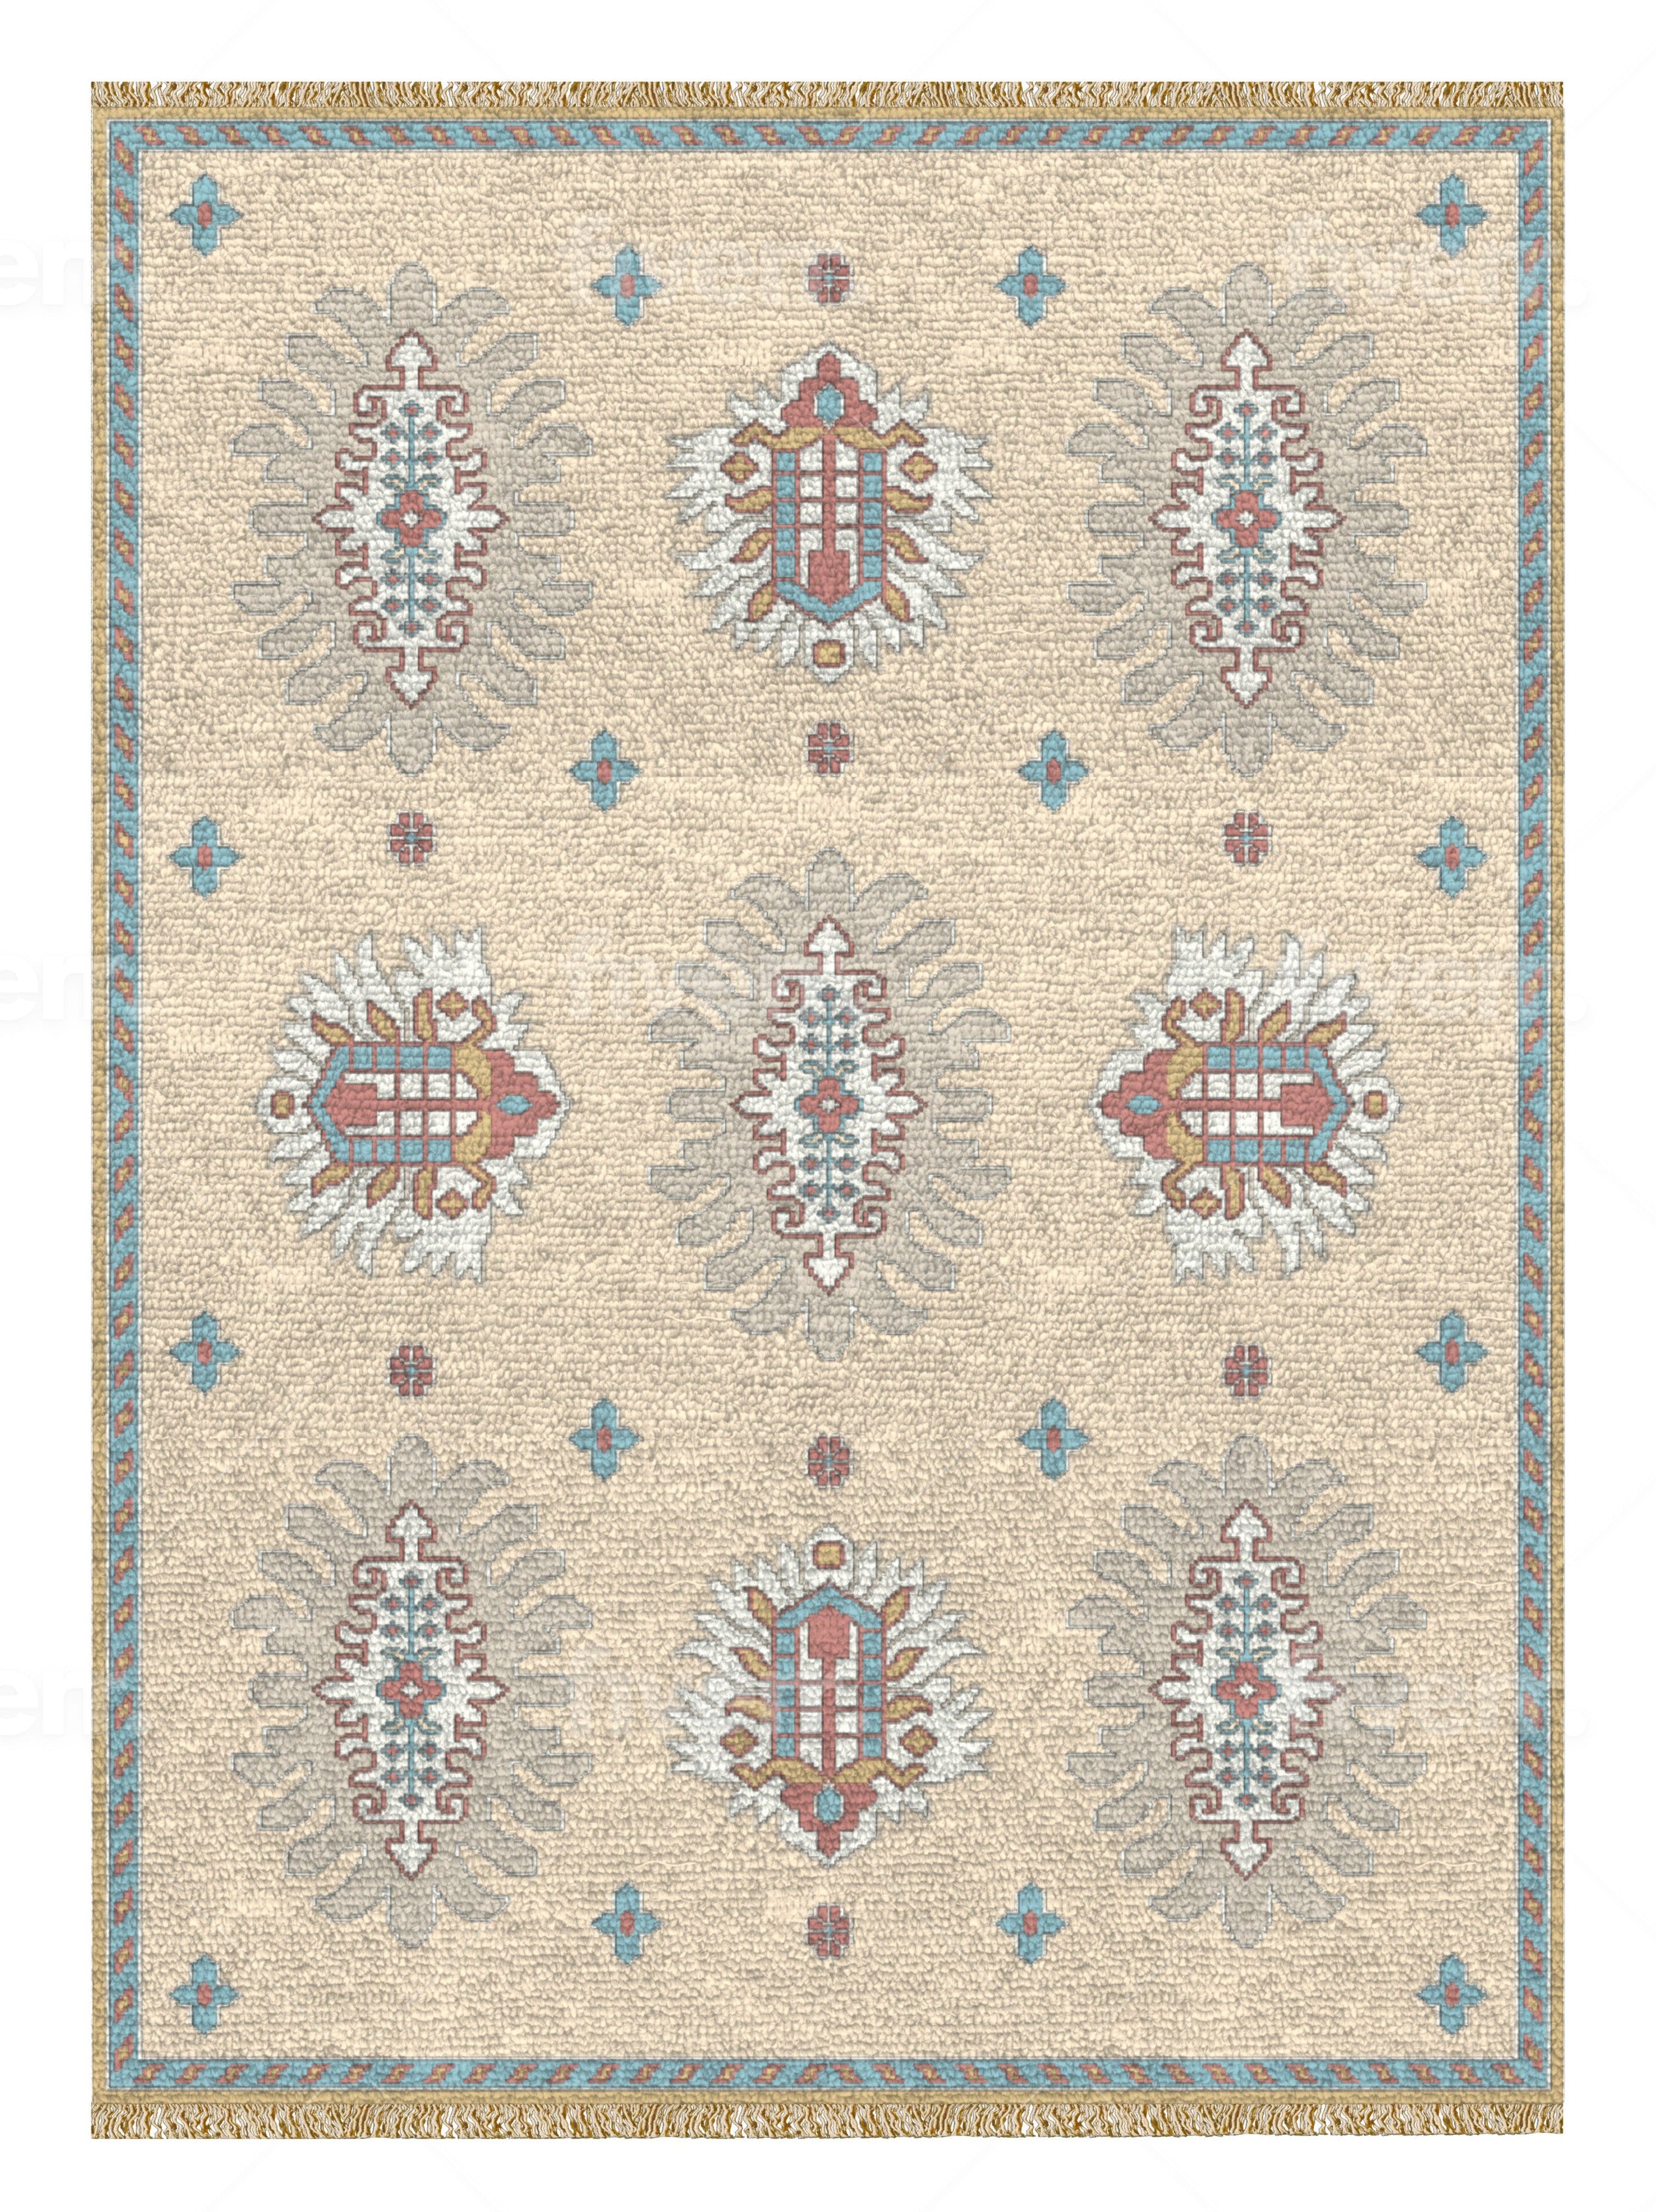 Cairene Hand-Knotted Wool Area Rug by Kevin Francis Design | Atlanta Interior Designer | Luxury Home Decor